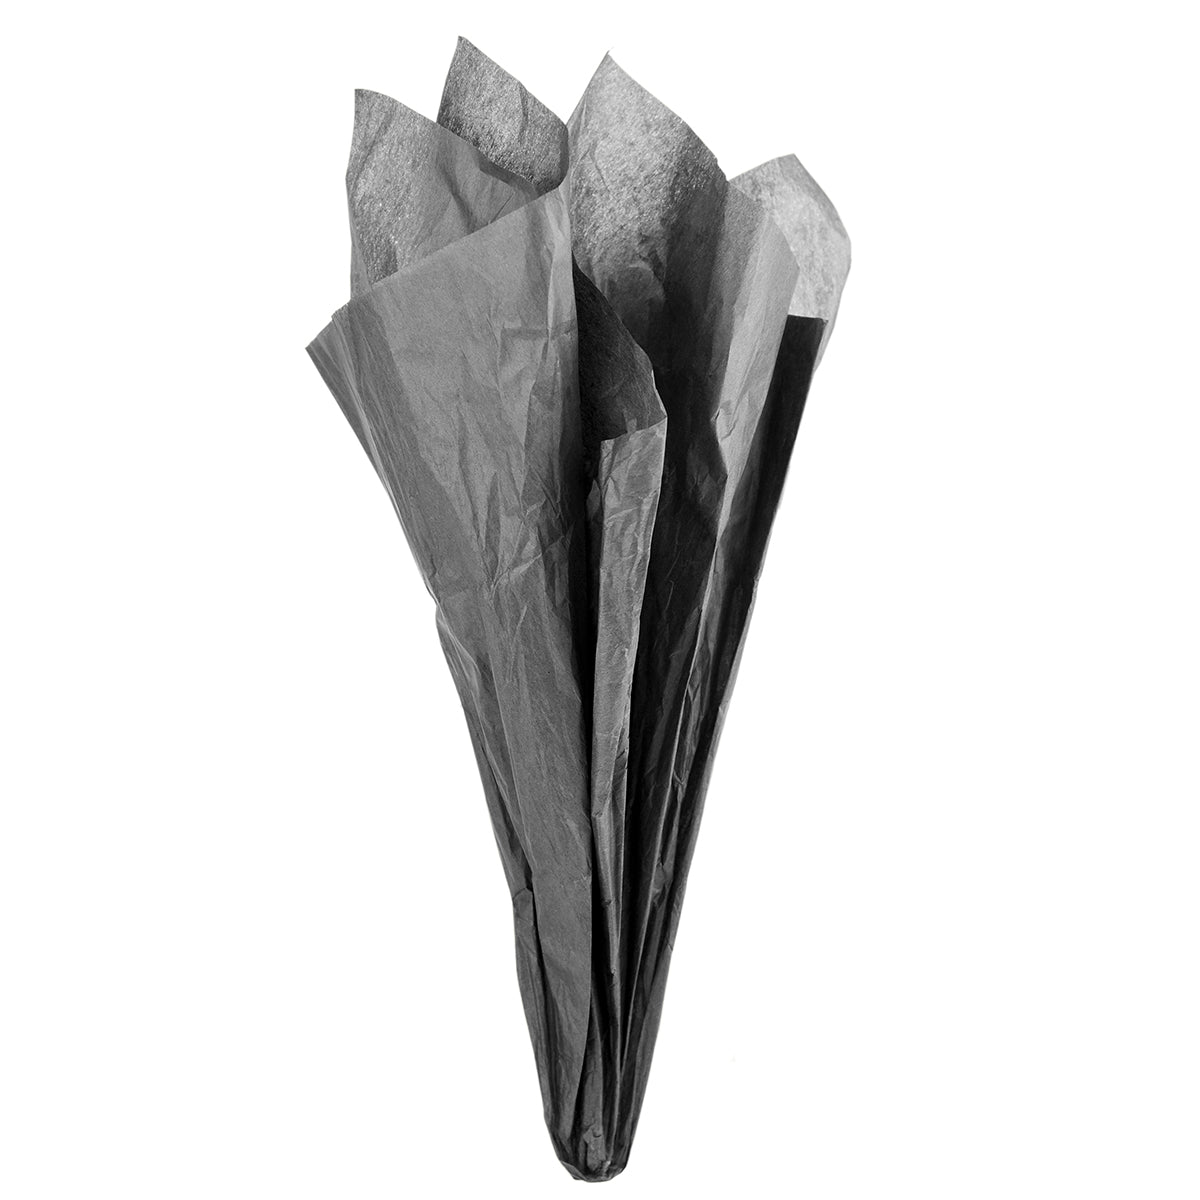 Displaying of a black tissue paper in ice cream cone shape